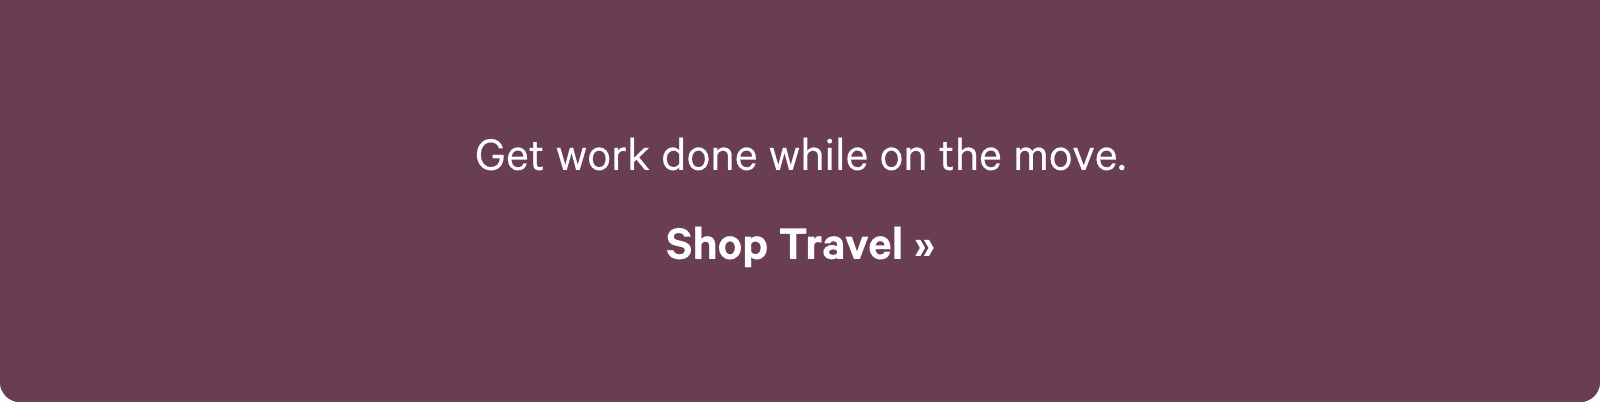 Get work done while one the move. Shop Travel ?